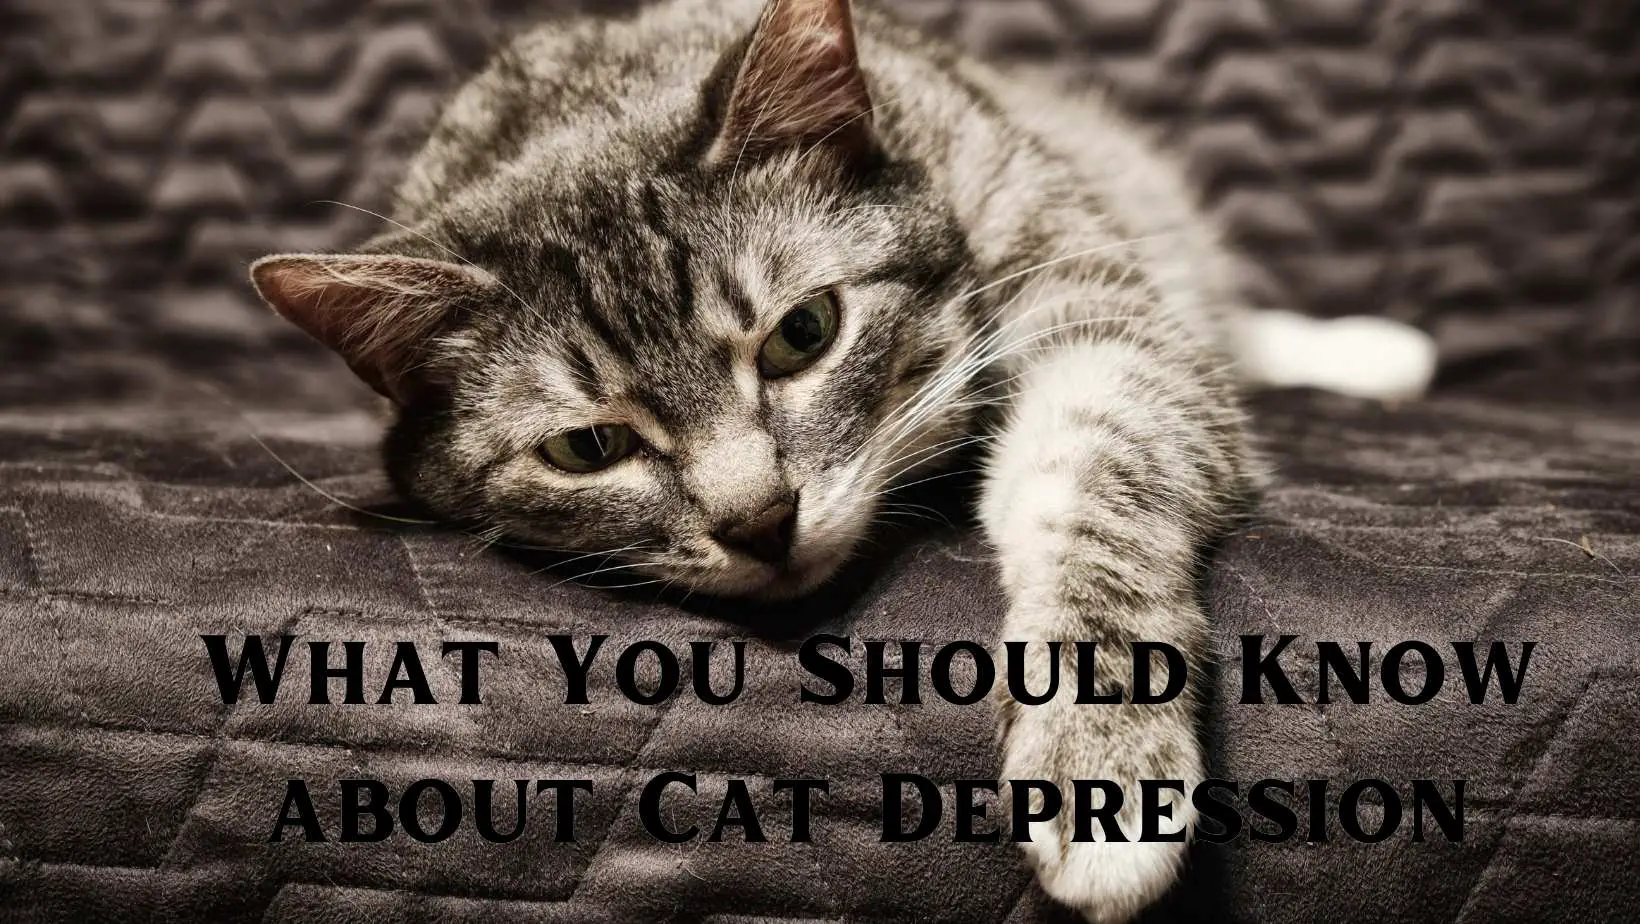 What You Should Know about Cat Depression